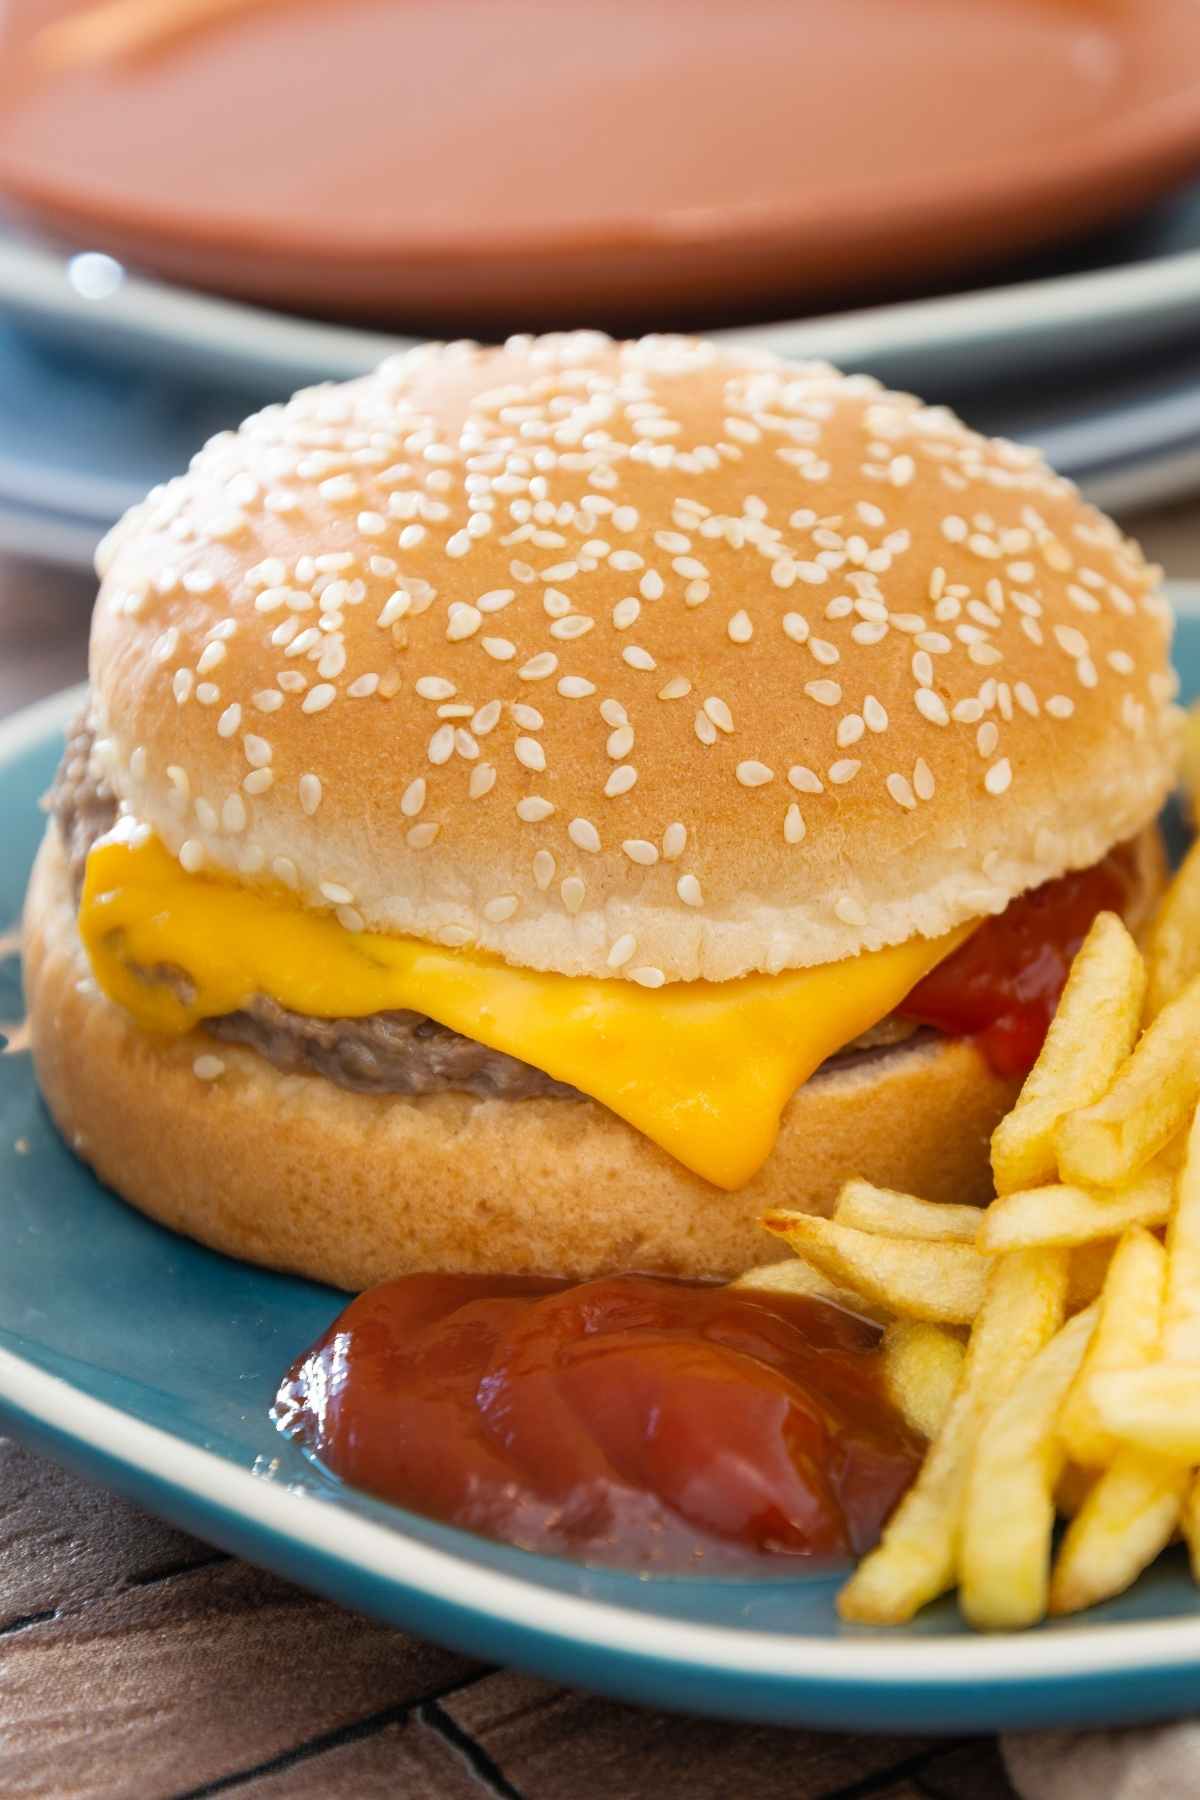 If you and your family enjoy the cheeseburgers at McDonald’s, this homemade copycat recipe is just what you need! It’s better than the cheeseburgers at the golden arches!